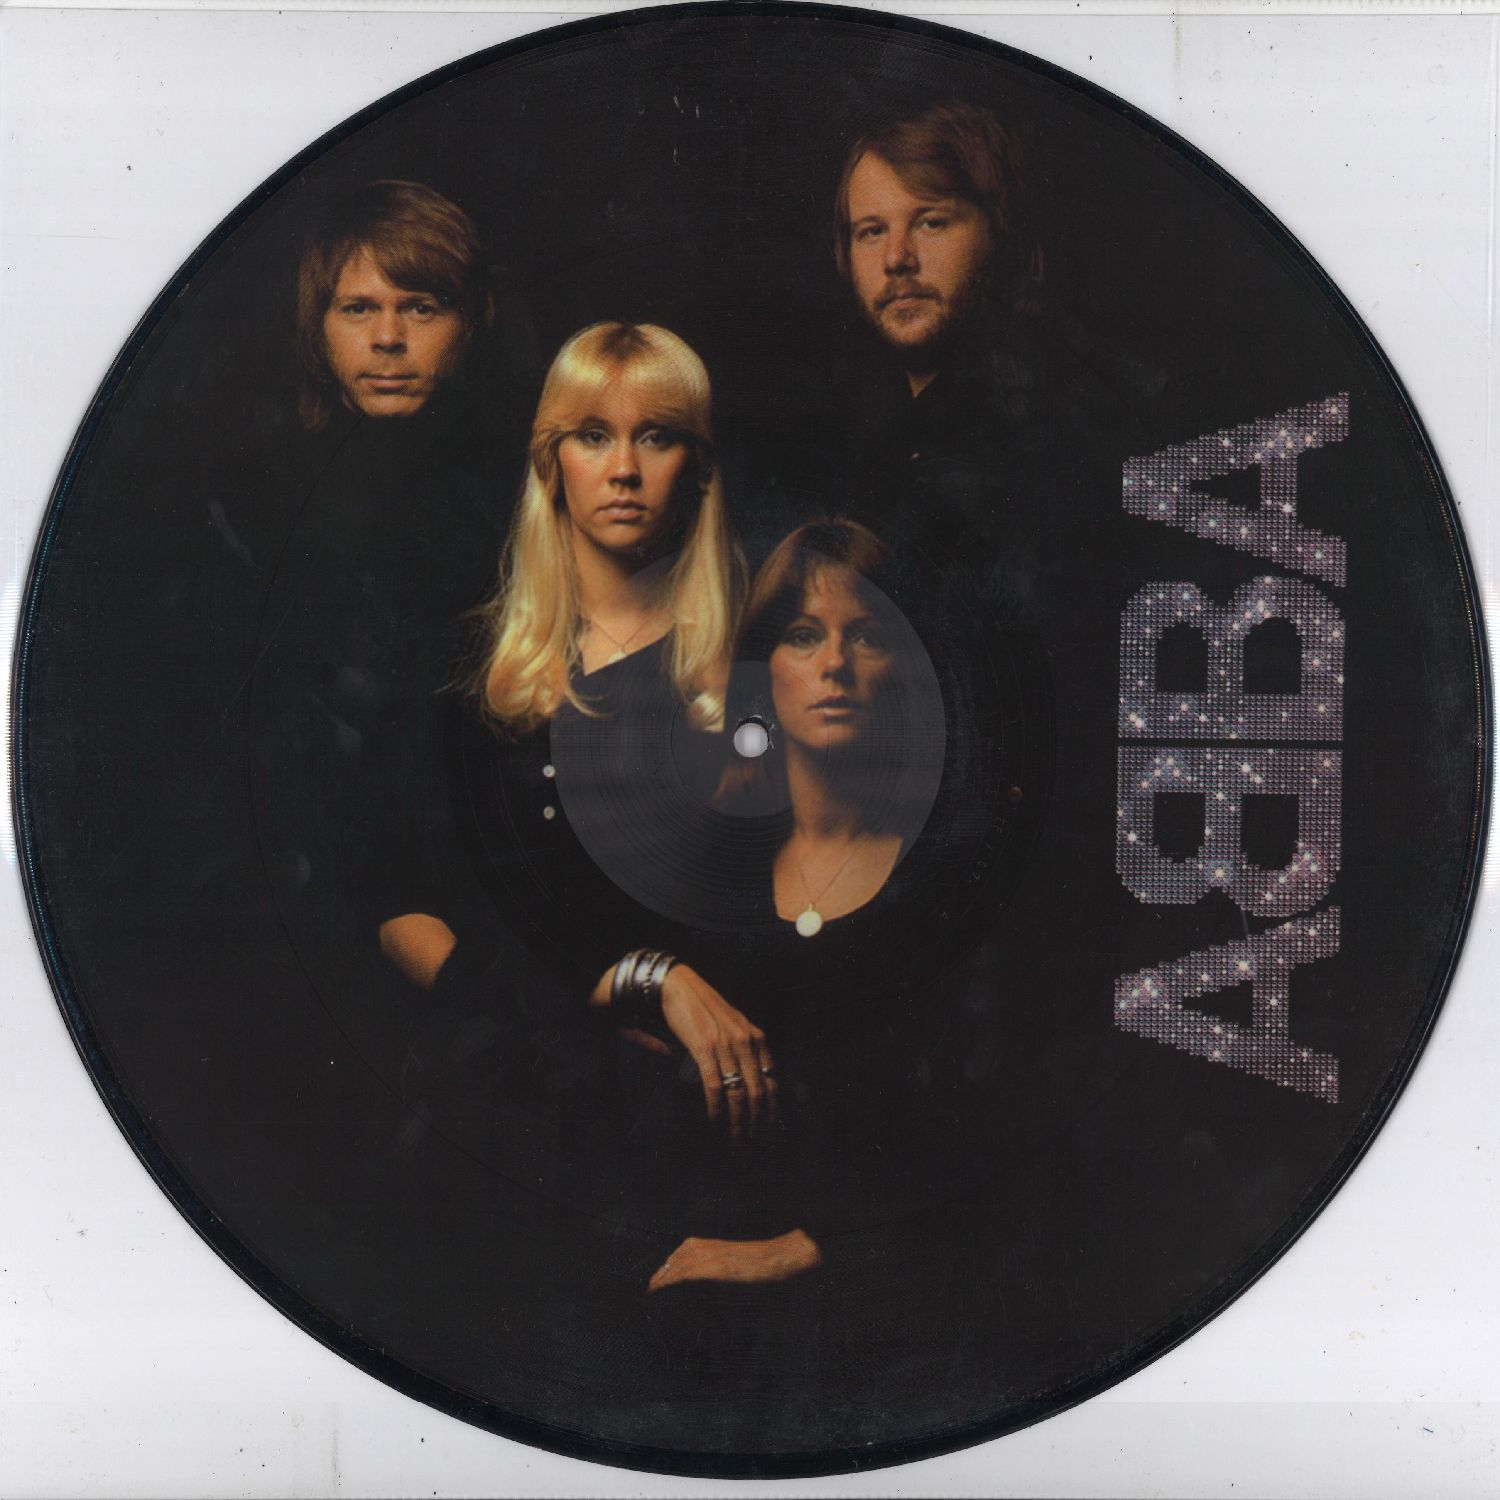 ABBA / アバ / ANGELEYES / LOVELIGHT / IF IT WASN'T FOR THE NIGHTS / I'M A MARIONETTE (12")